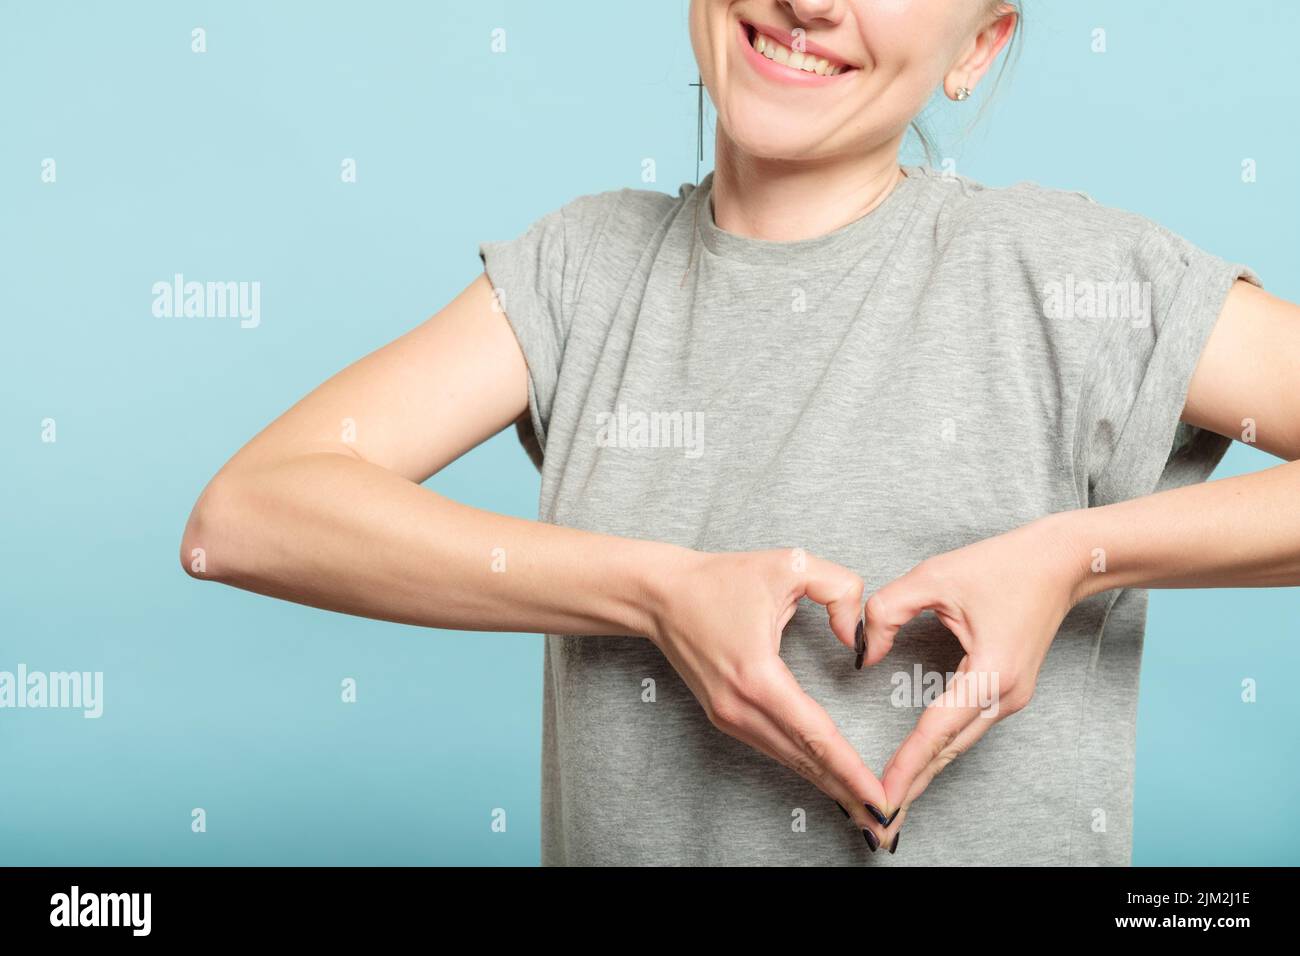 smiling woman heart shape hands gesture sign Stock Photo